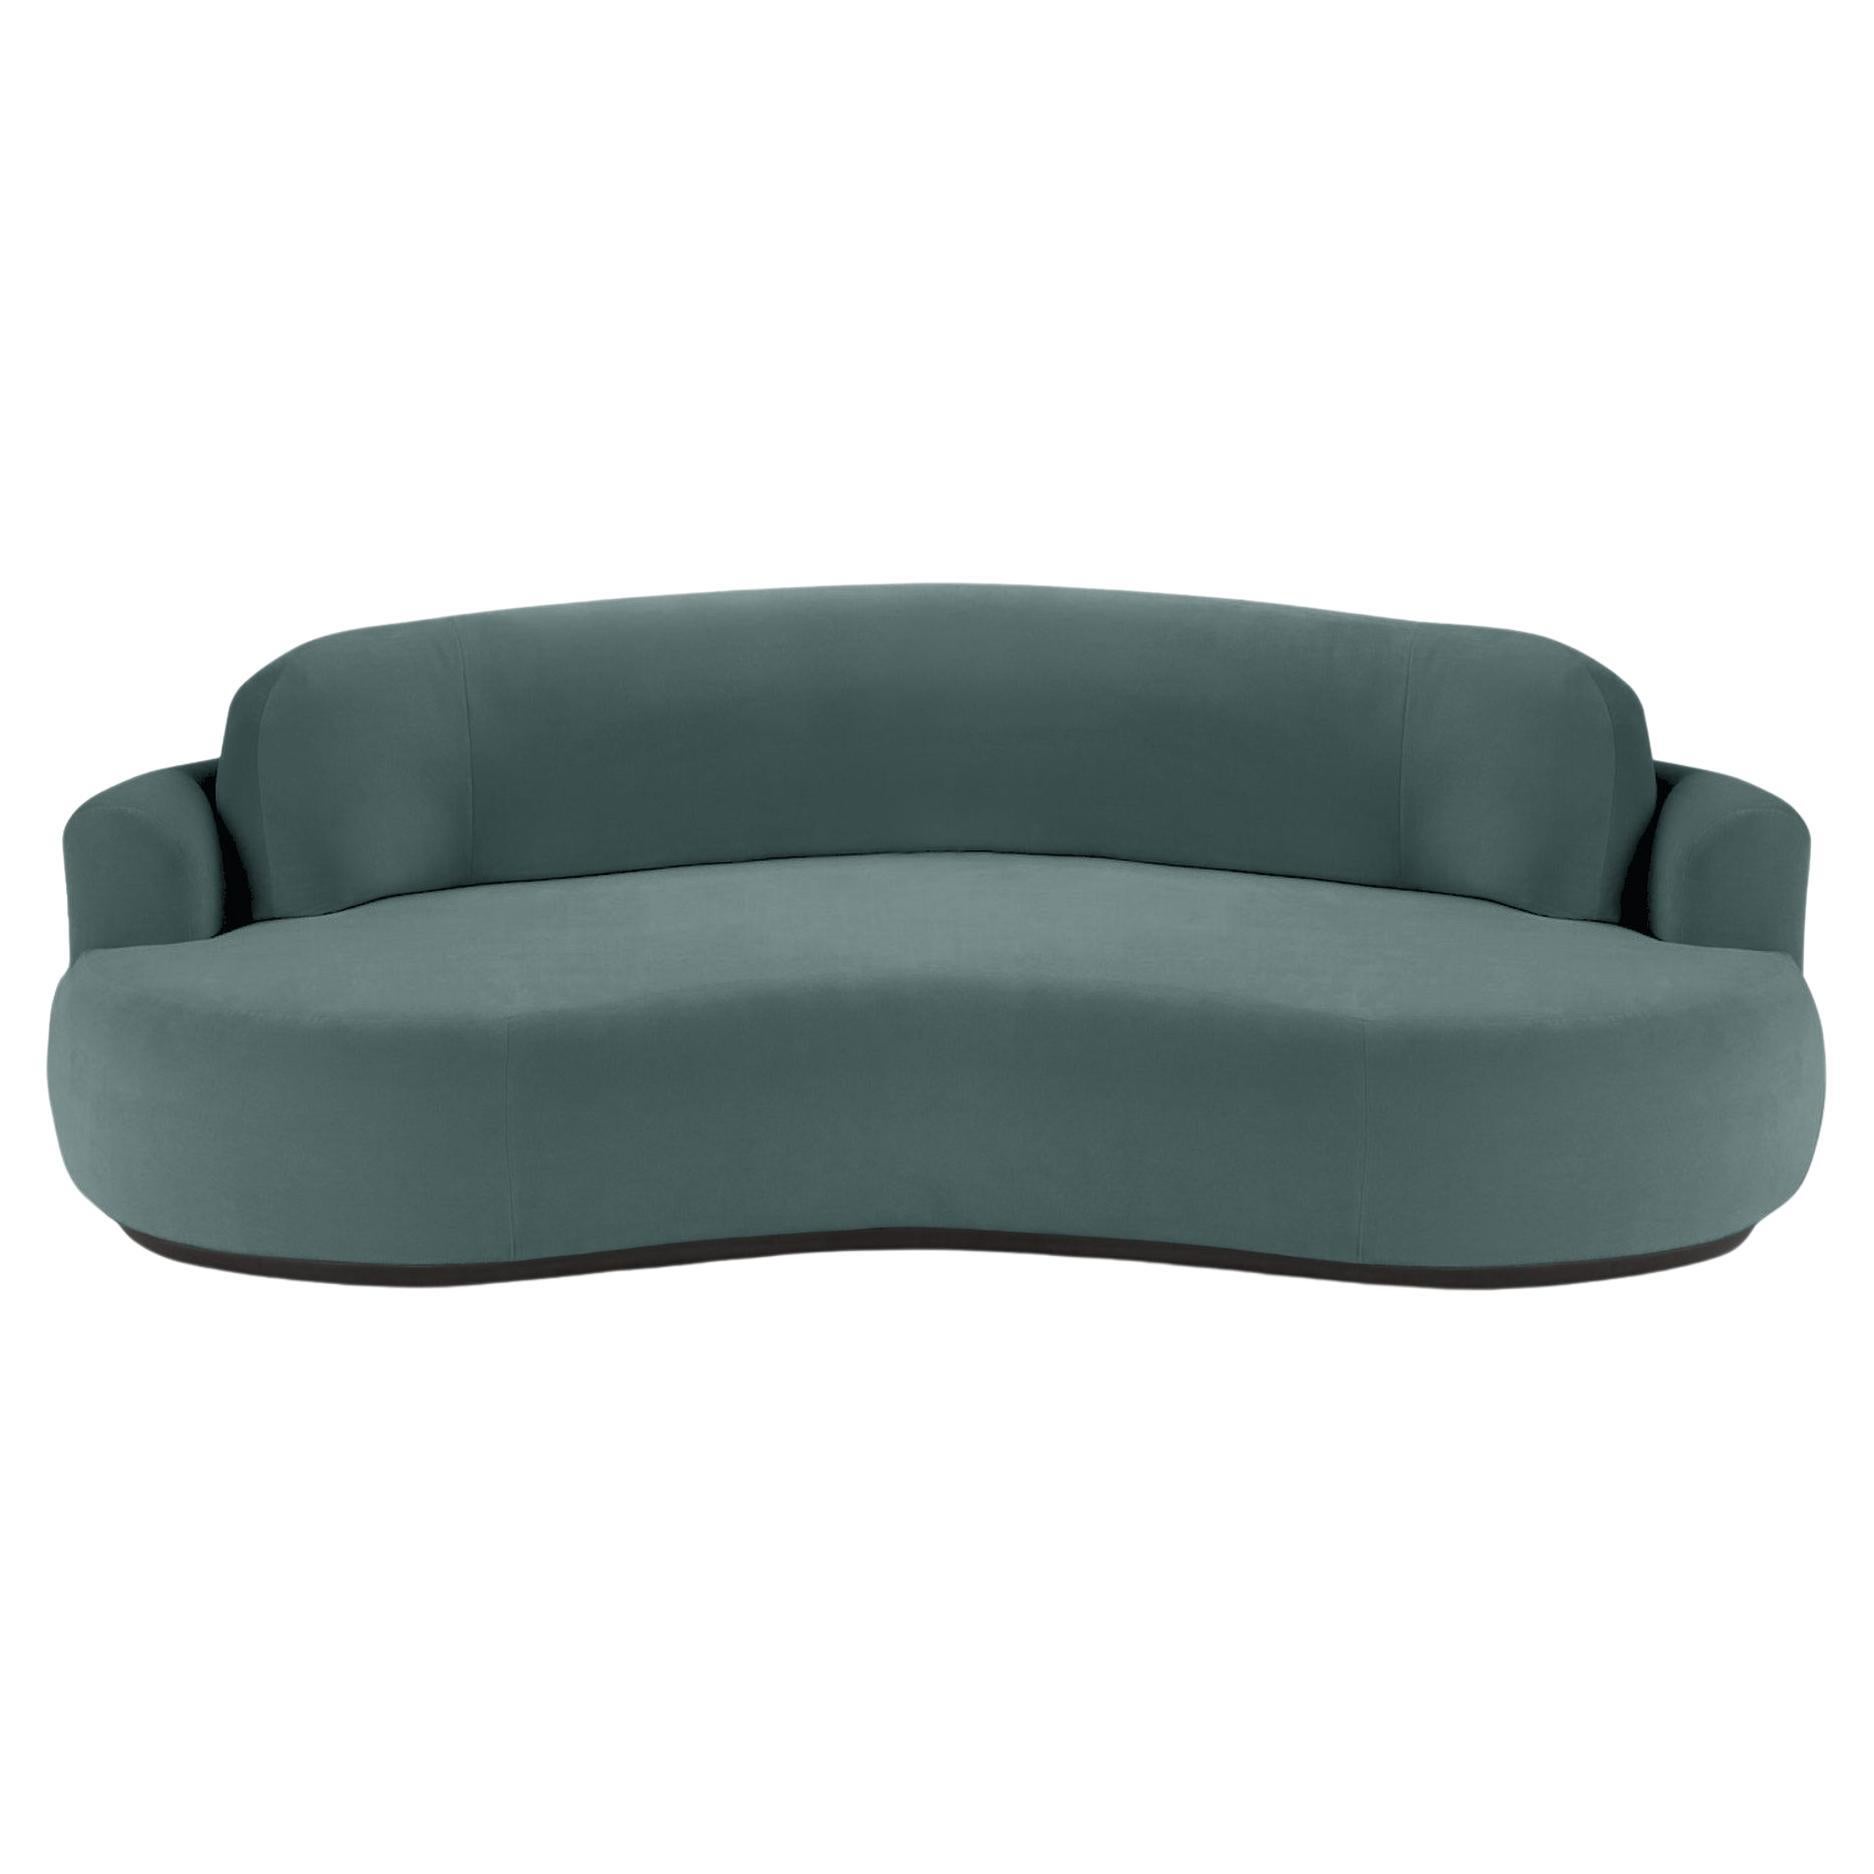 Naked Round Sofa, Medium with Beech Ash-056-5 and Teal